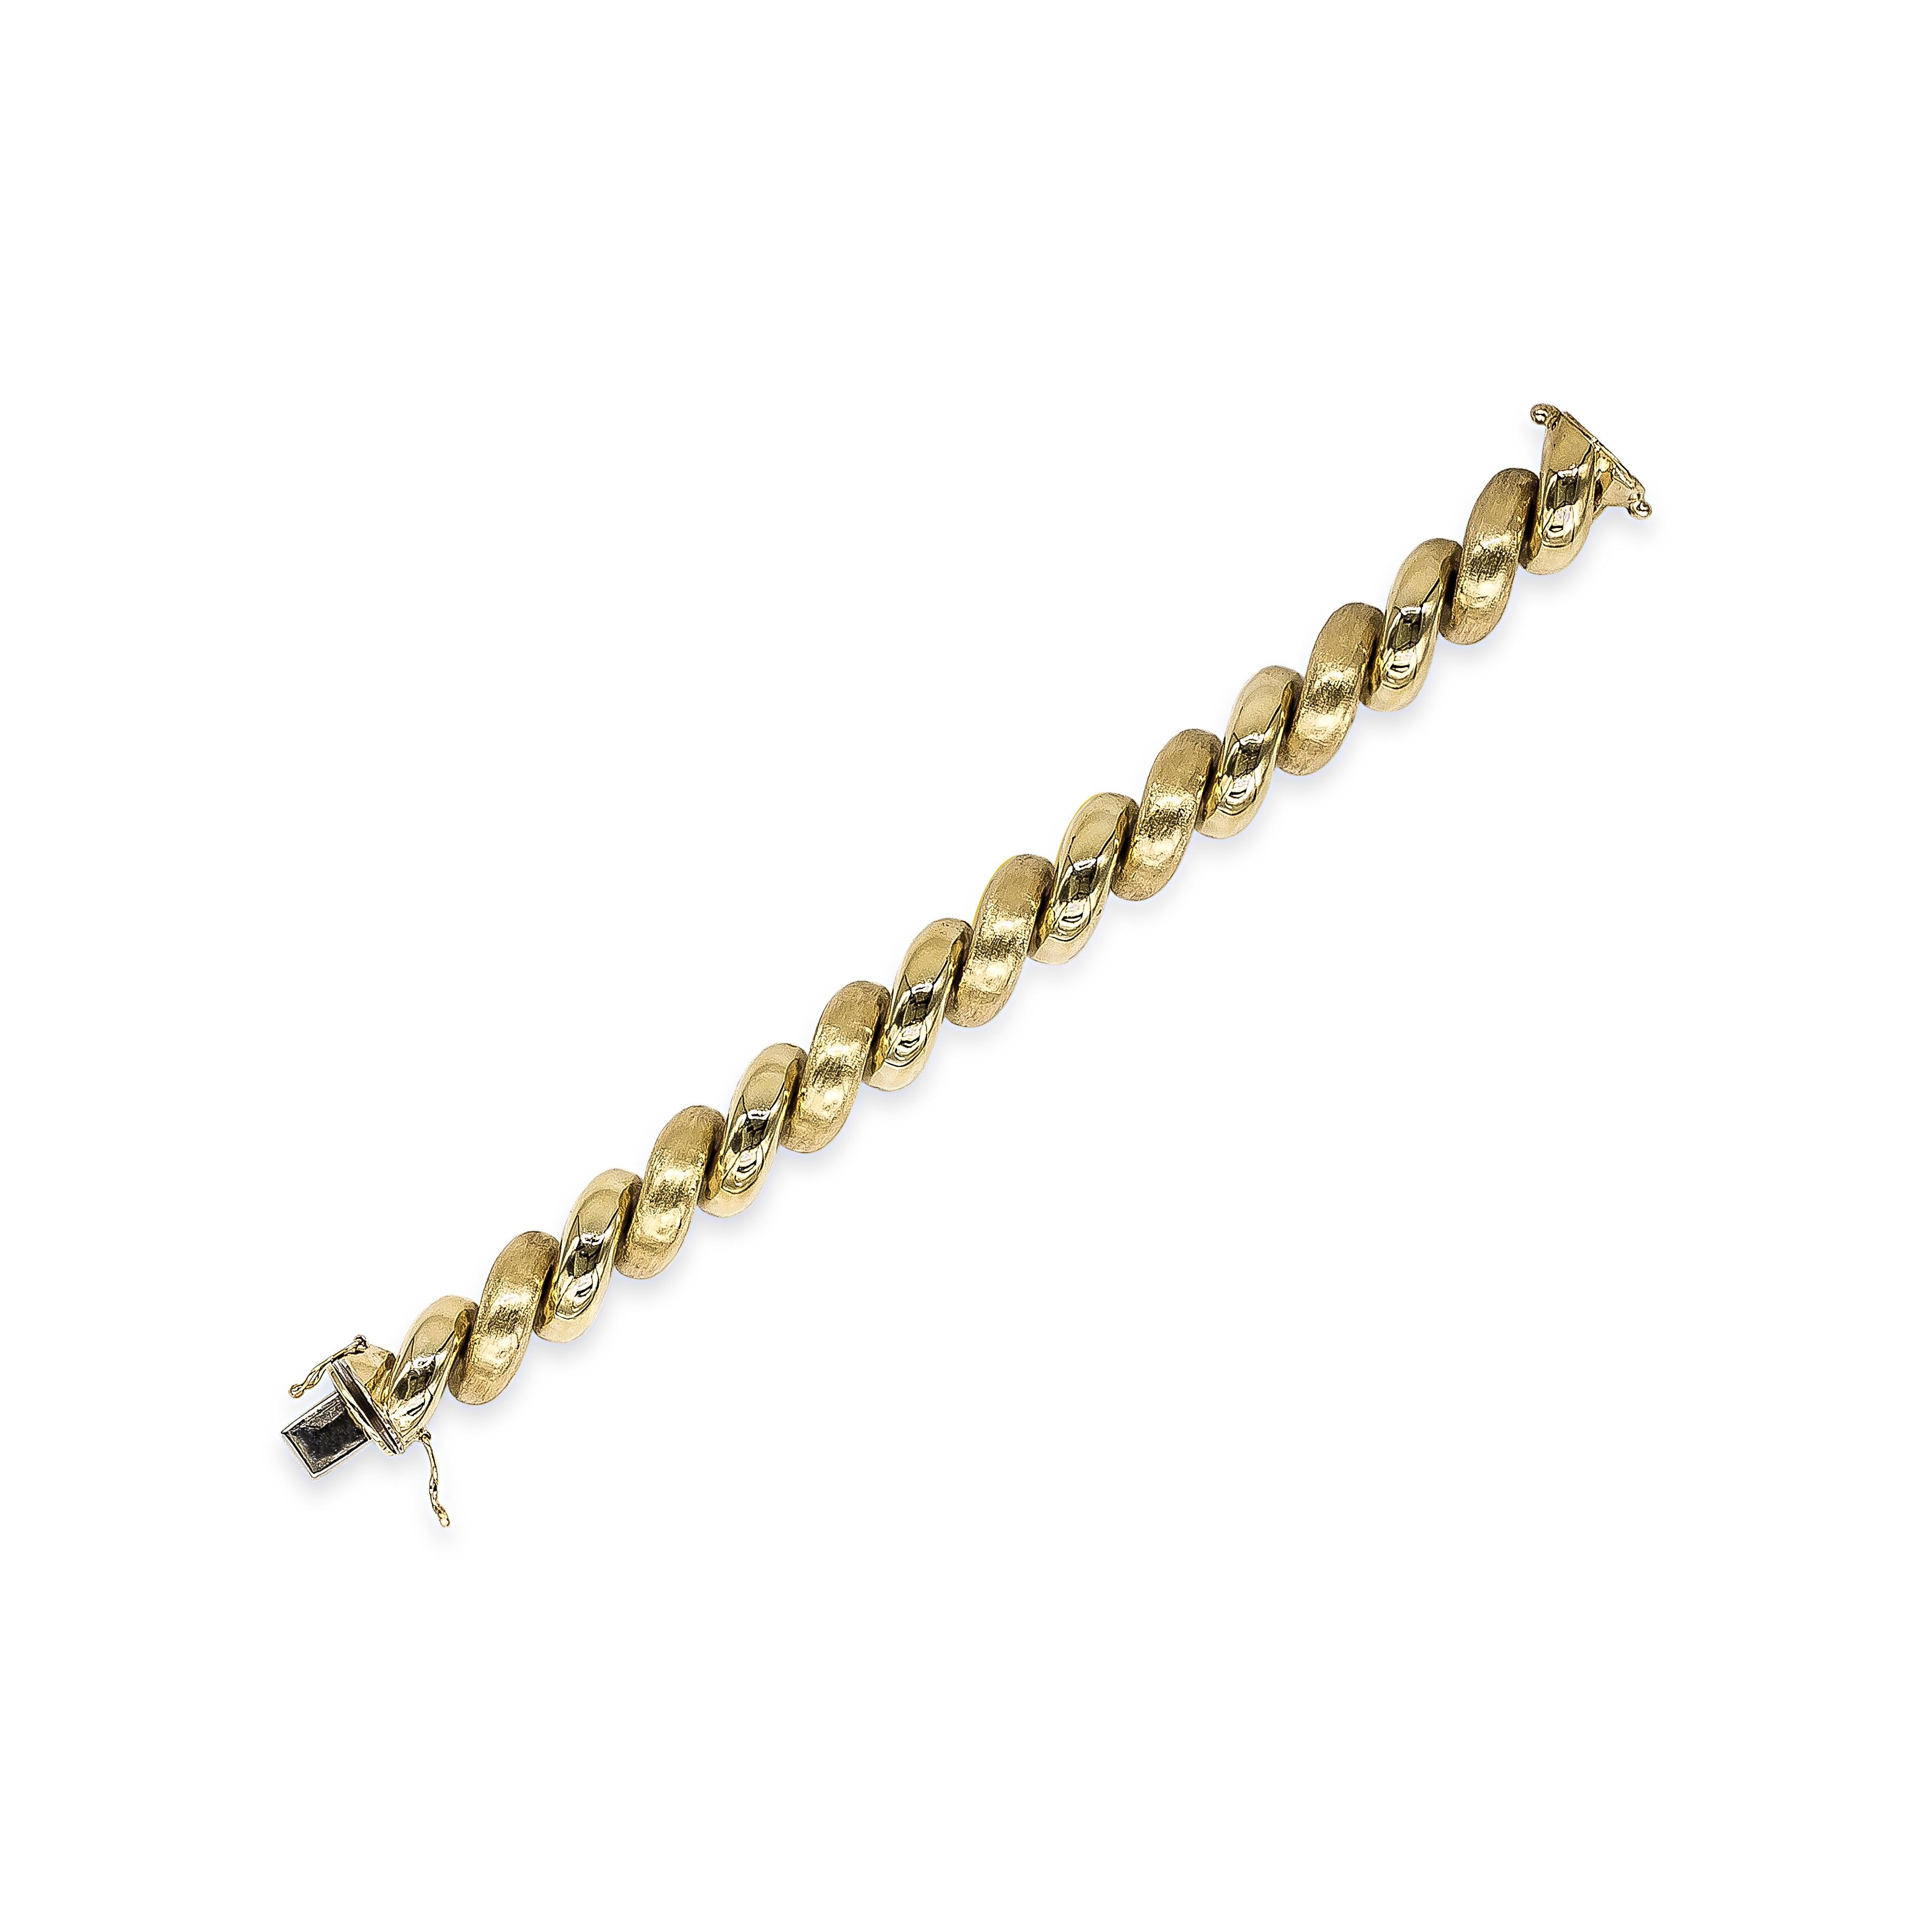 14 karat yellow gold bracelet showcasing a spiral design. Each rotation features an alternating brushed, and shine finish. 7.25 inches in length.

Style available in different price ranges. Prices are based on your selection of the 4C’s (Carat,